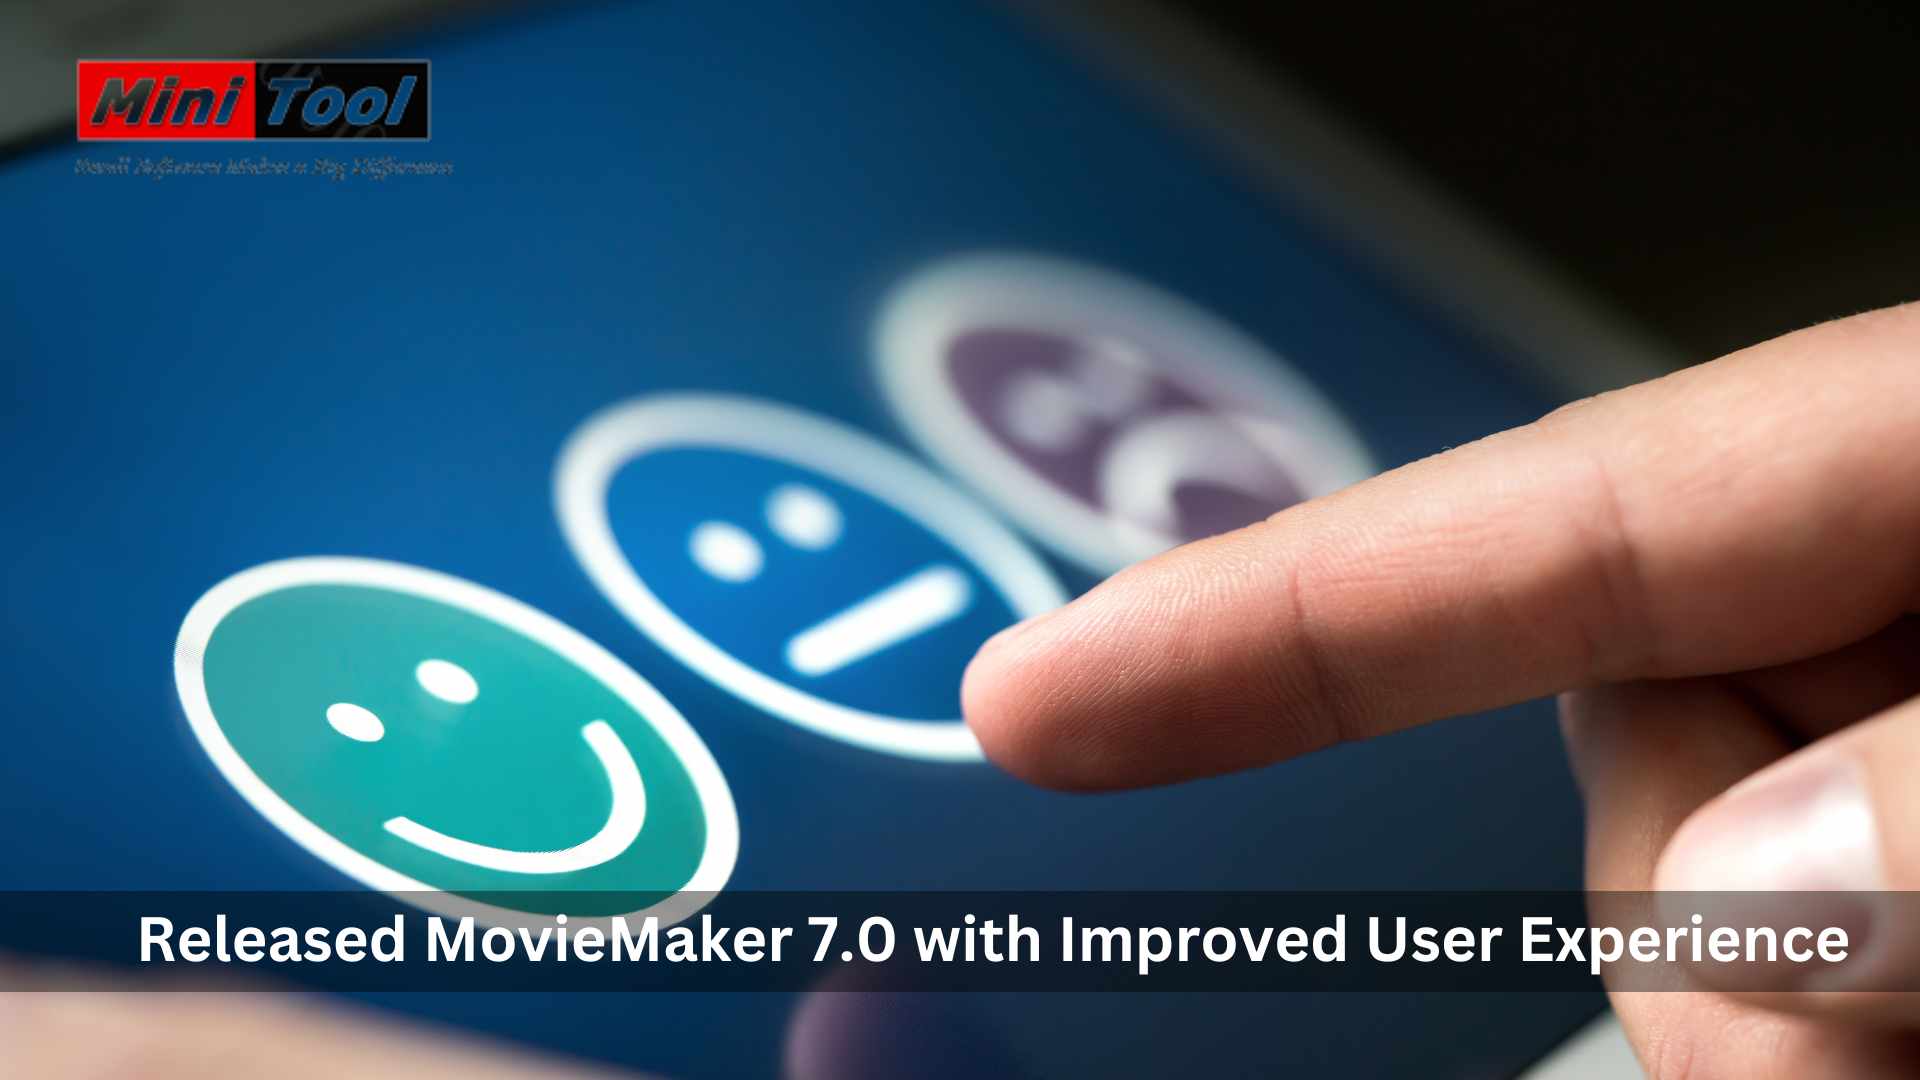 MiniTool Released MovieMaker 7.0 with Improved User Experience